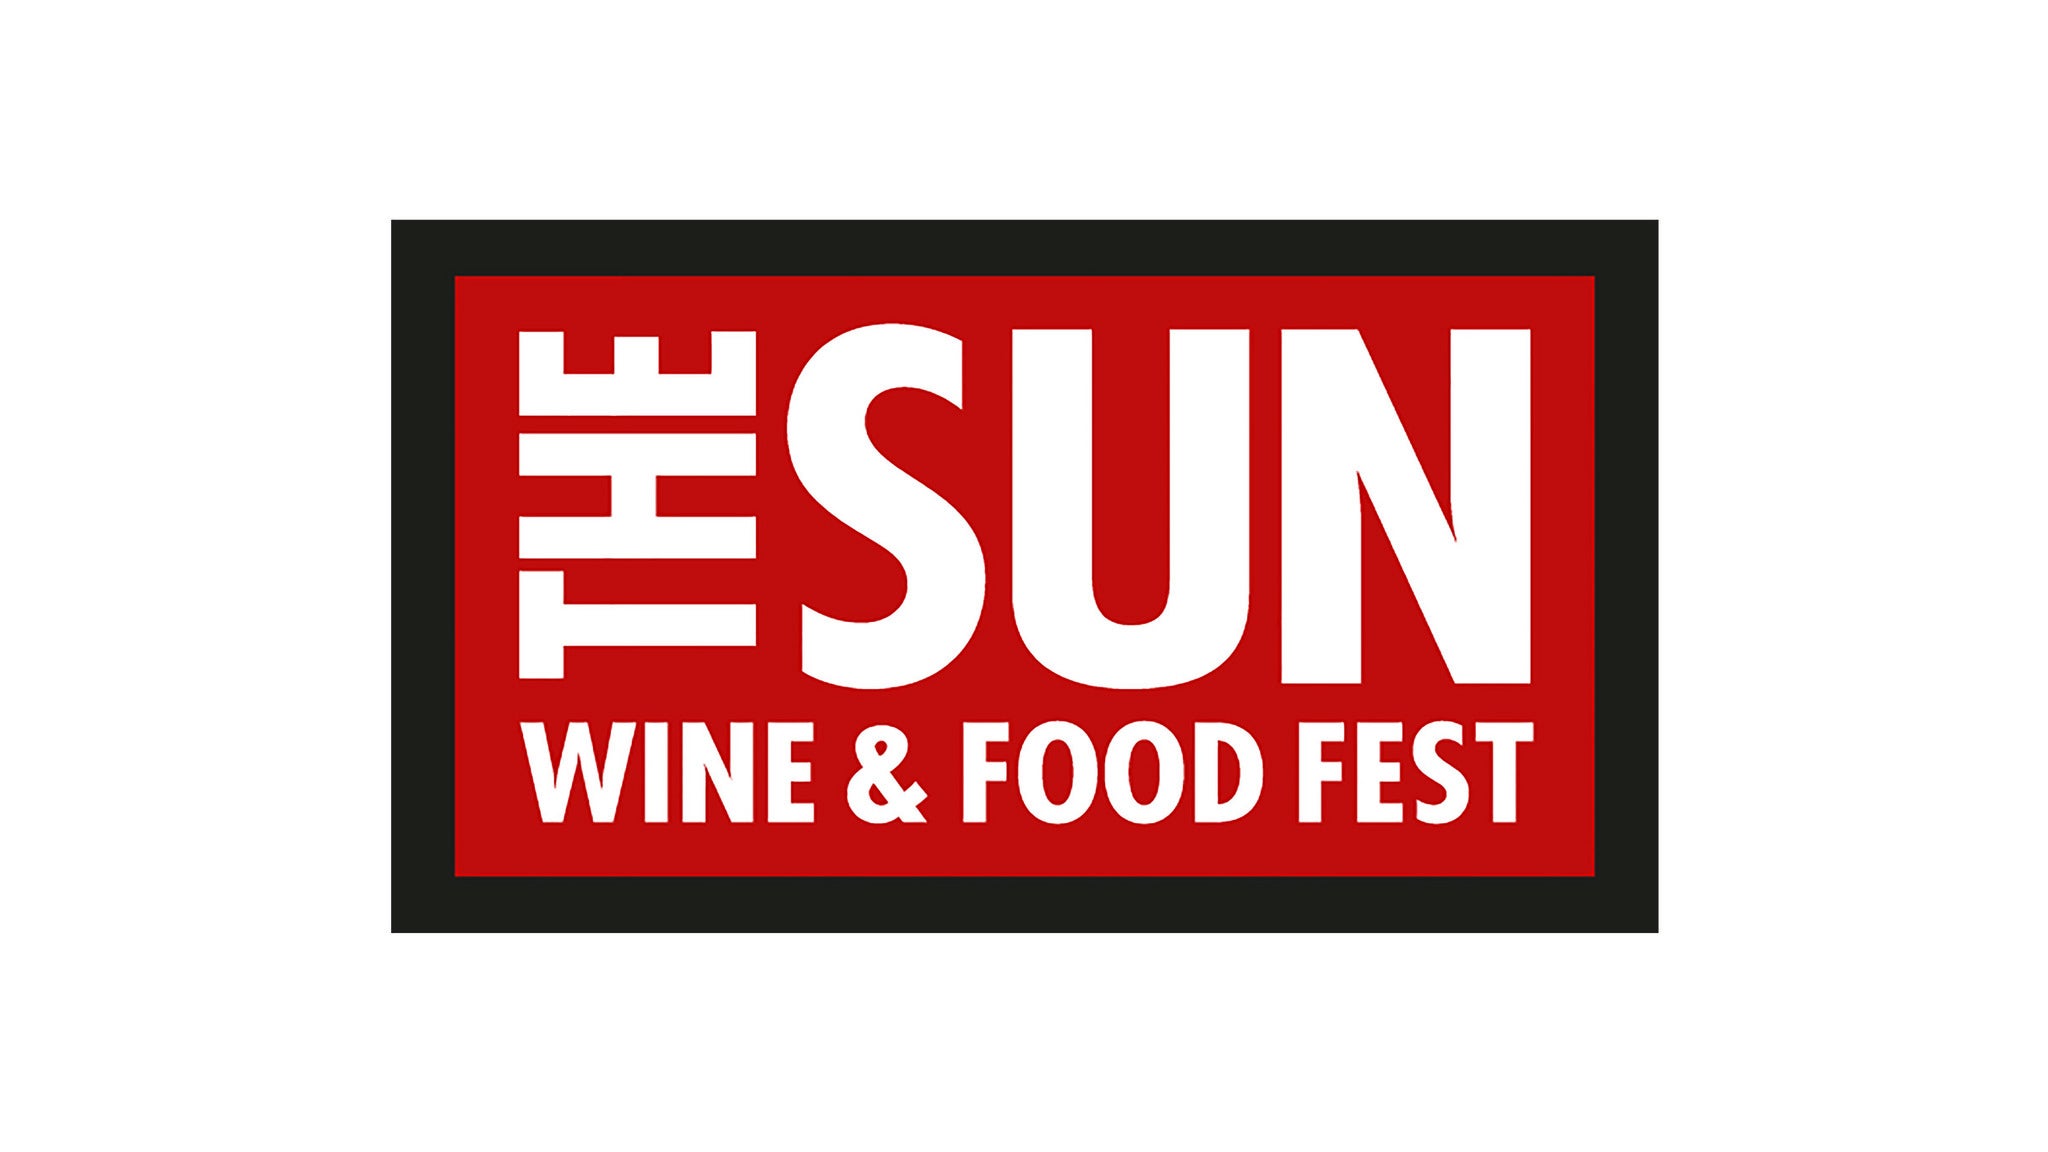 Sun Wine & Food Fest 2022 Grand Tasting Preview in Uncasville promo photo for Cheers presale offer code